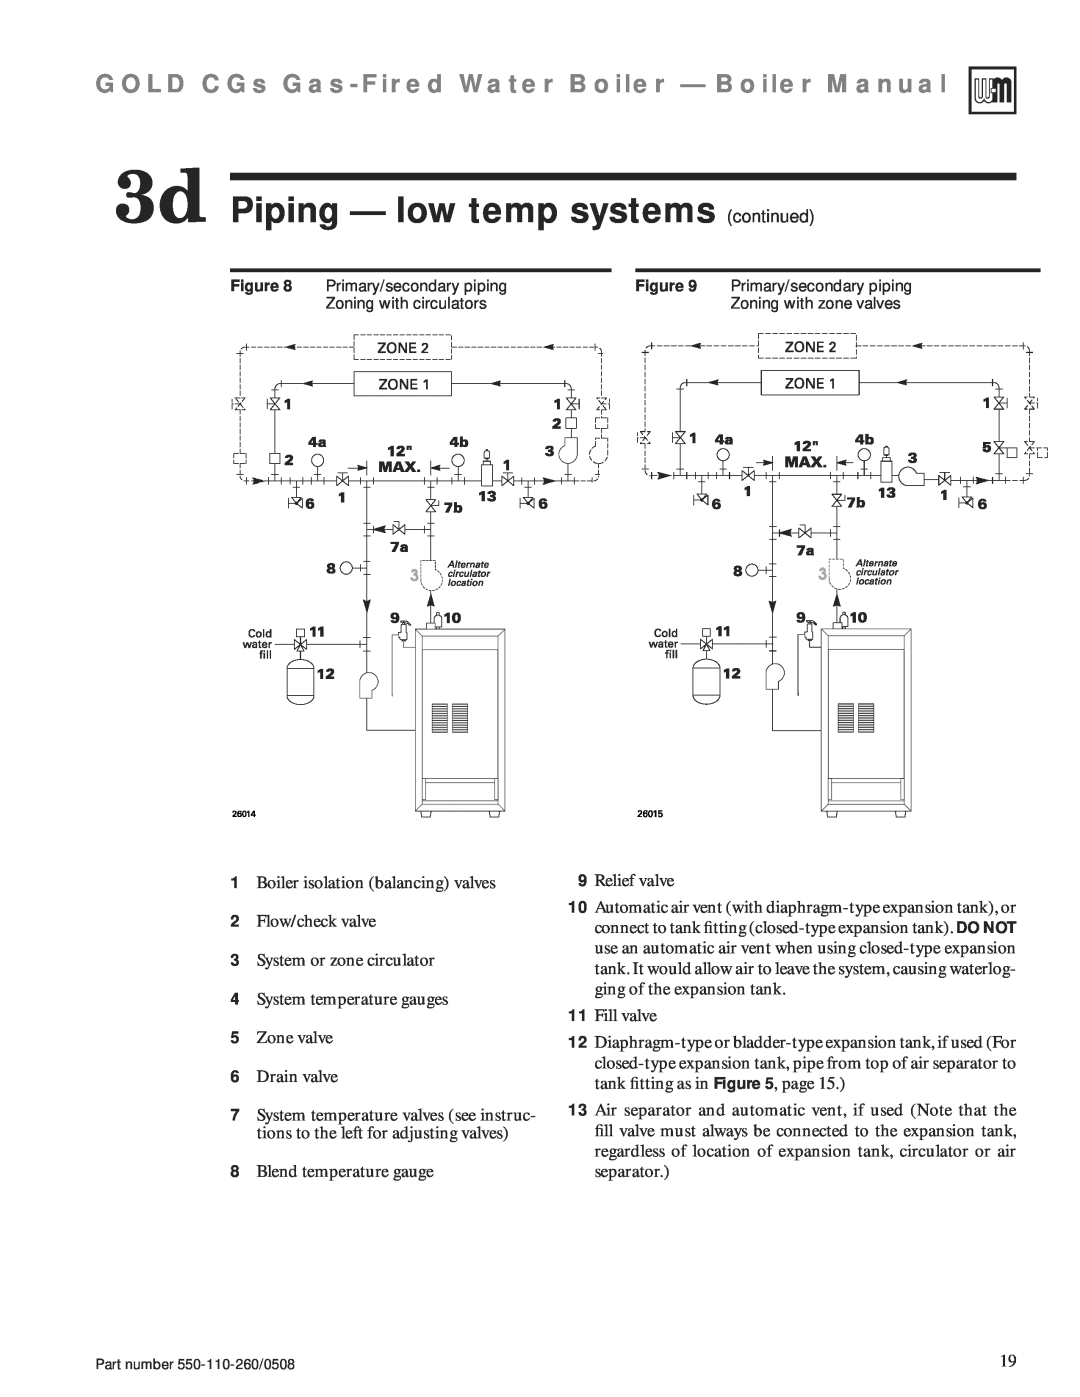 Weil-McLain 550-110-260/0508 manual 3d Piping — low temp systems continued, GOLD CGs Gas-FiredWater Boiler — Boiler Manual 